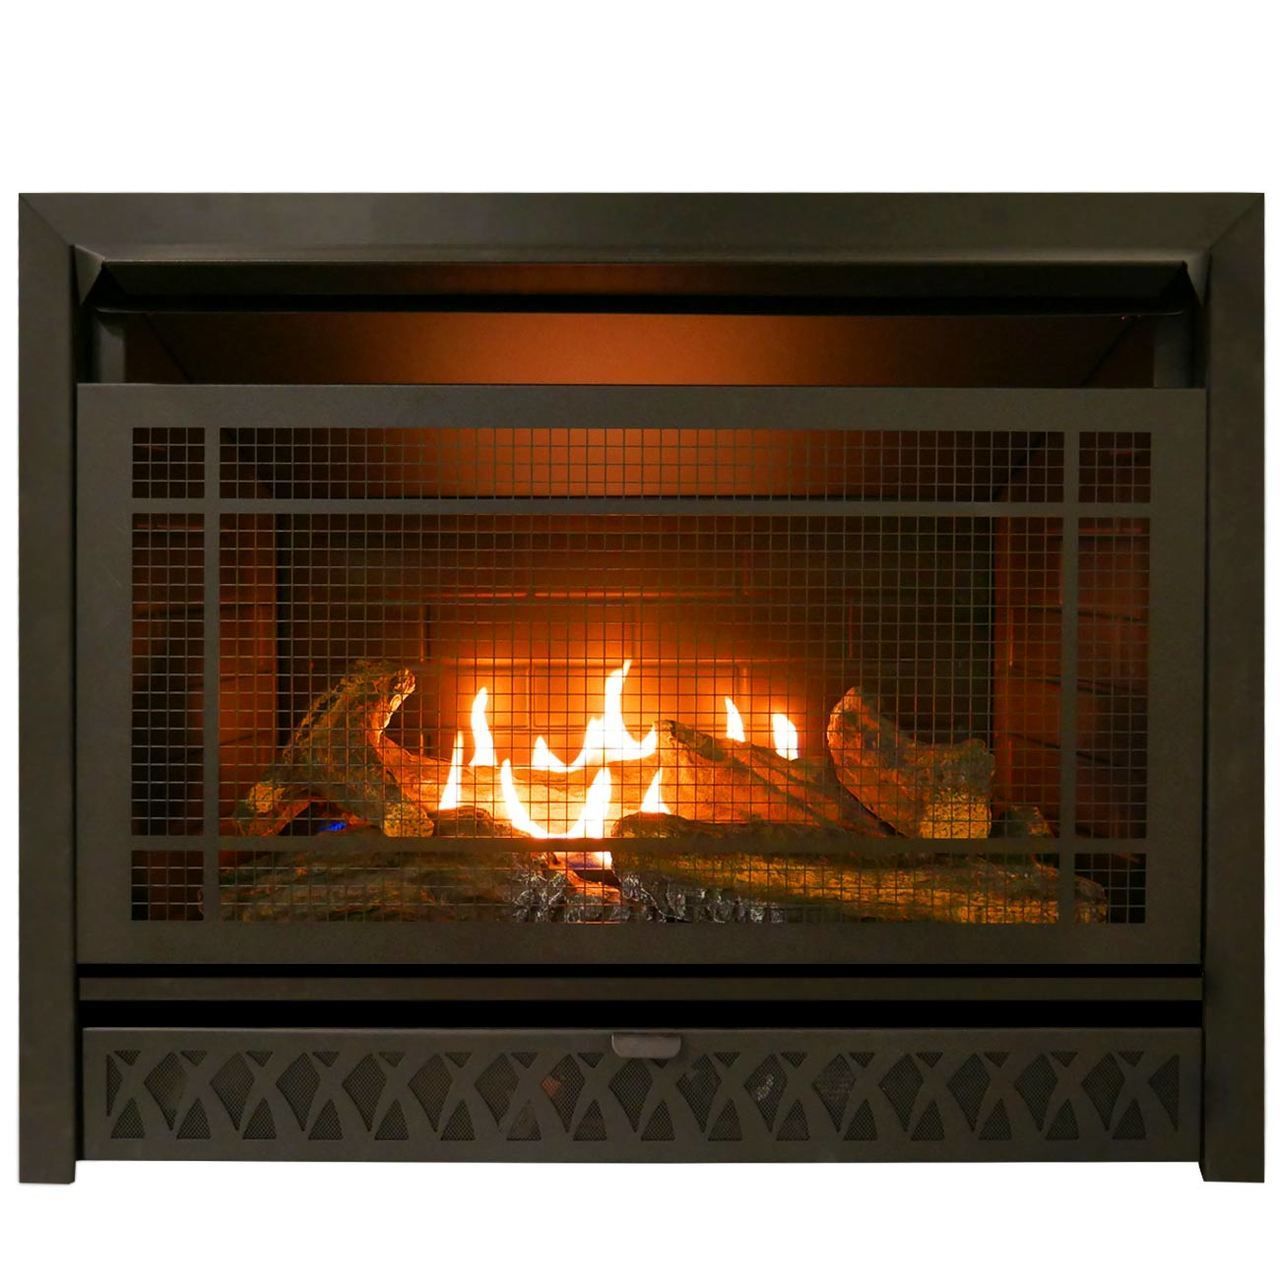 Pro Fireplace Lovely Pro Fireplaces 29 In Ventless Dual Fuel Firebox Insert